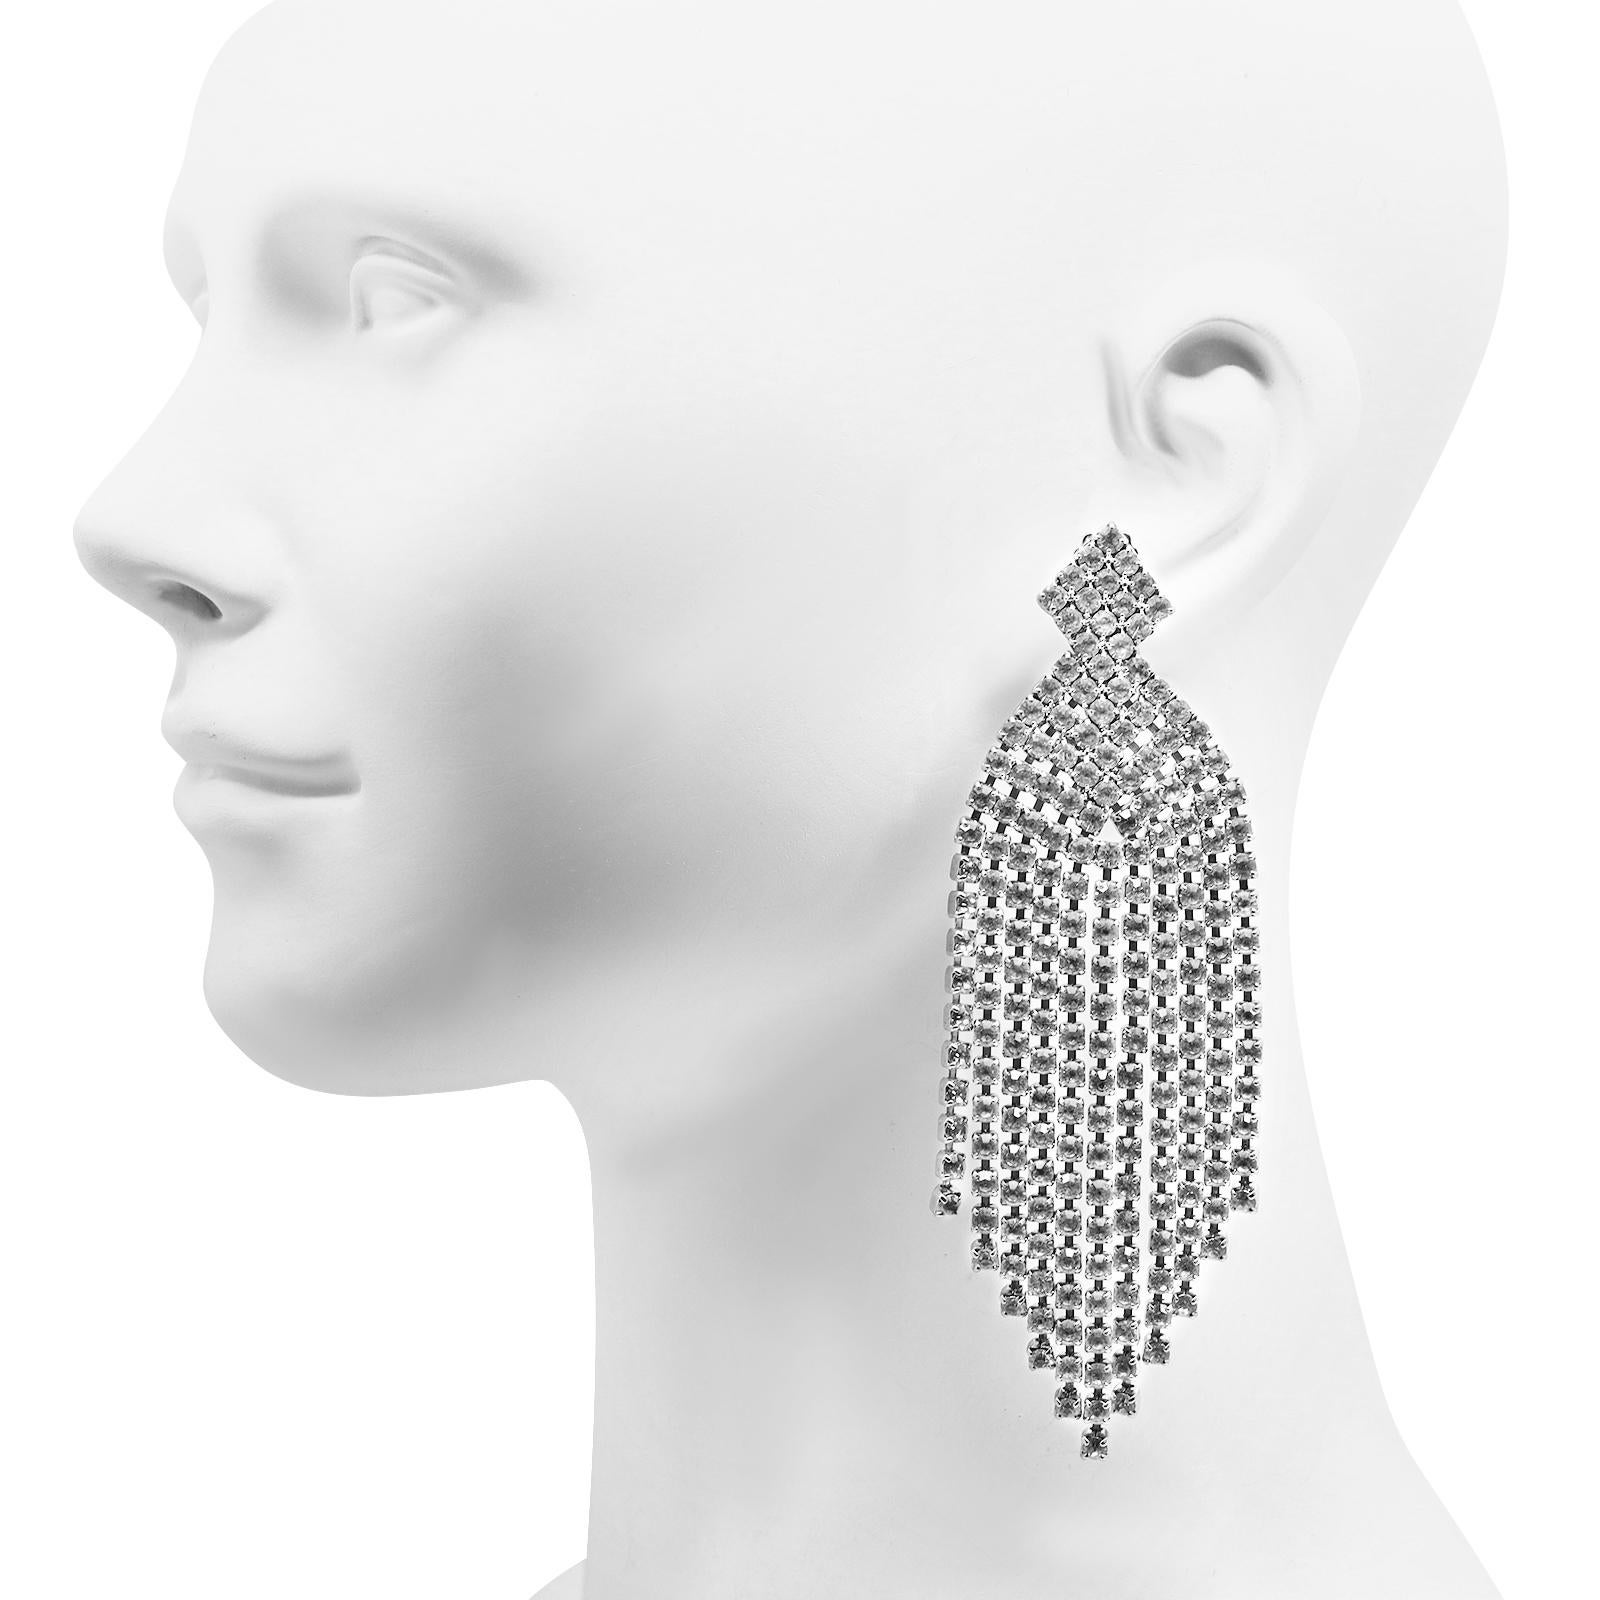 Vintage Diamante Fringe Dangling Waterfall Earrings. Looks great with a t shirt or for a night out. Clip On. These look so fun and so chic for the holidays or even for lunch out during the next few months.  Throw on a white shirt, jeans and a black